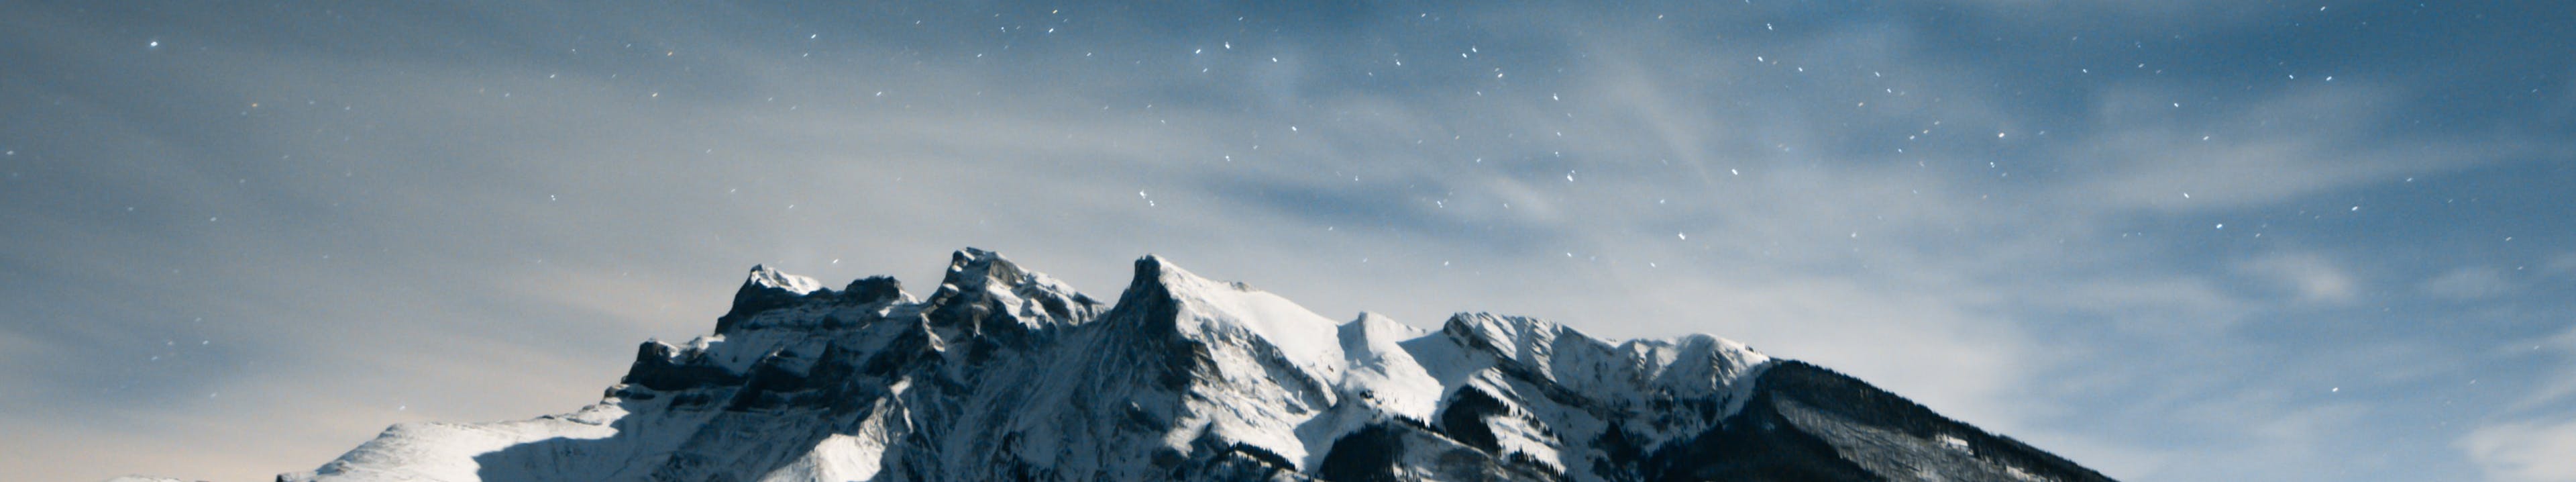 Starry Sky and Mountain Top